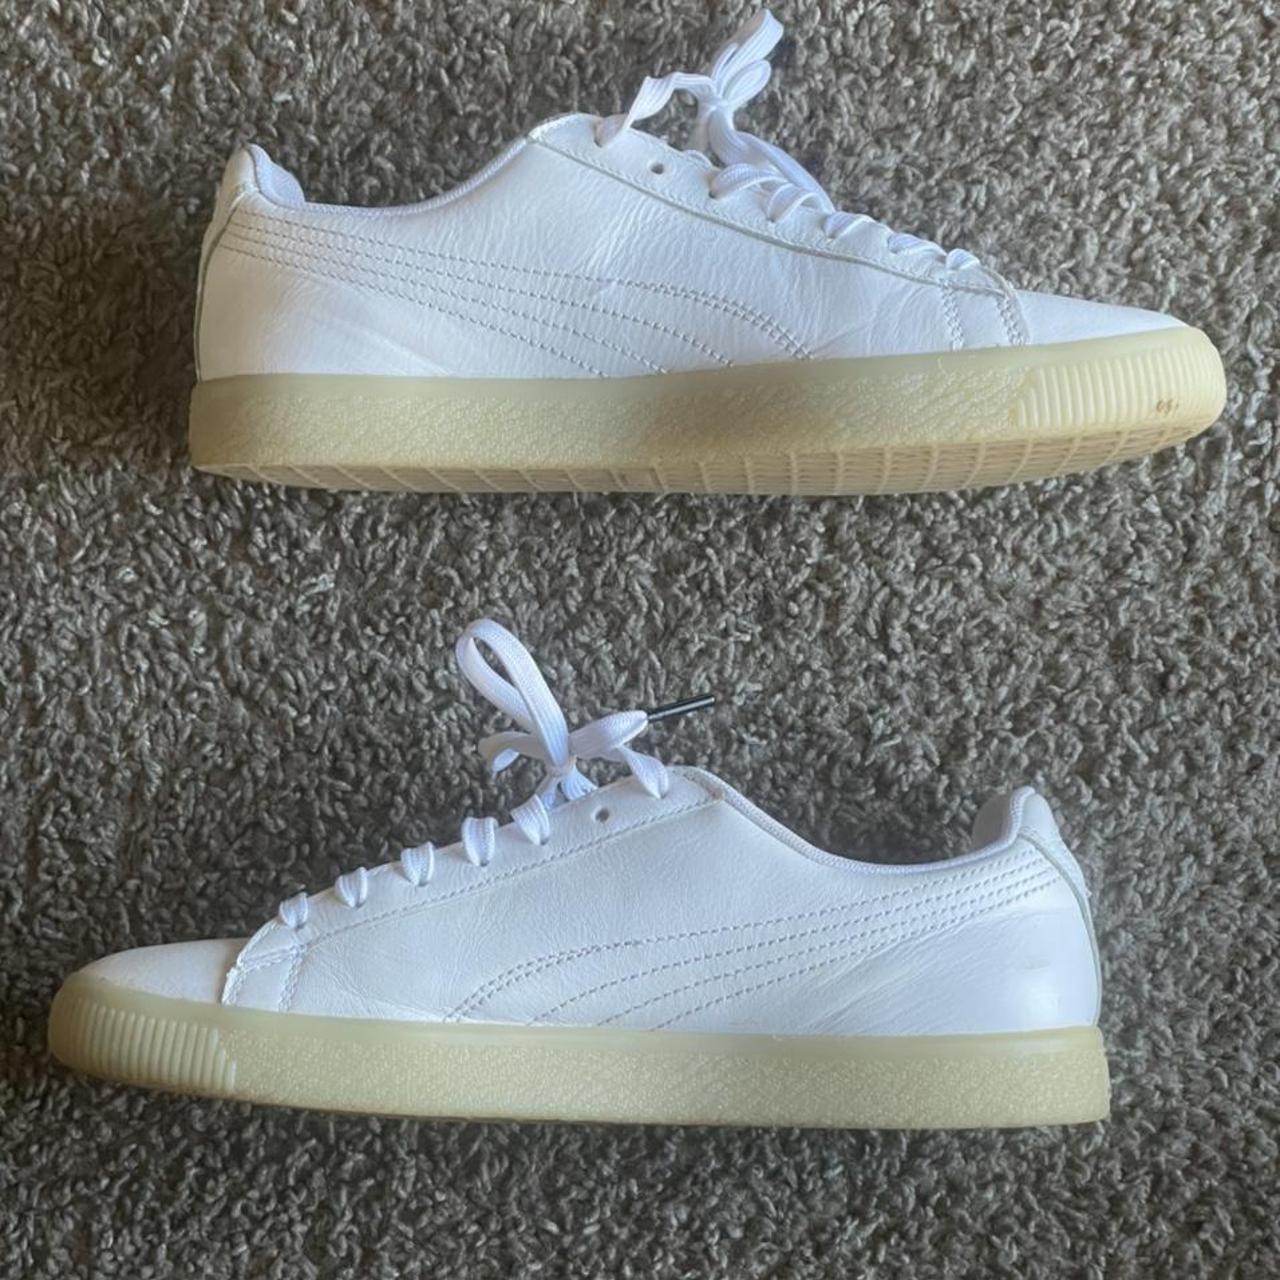 Puma Clyde, comes with box and extra laces - Depop